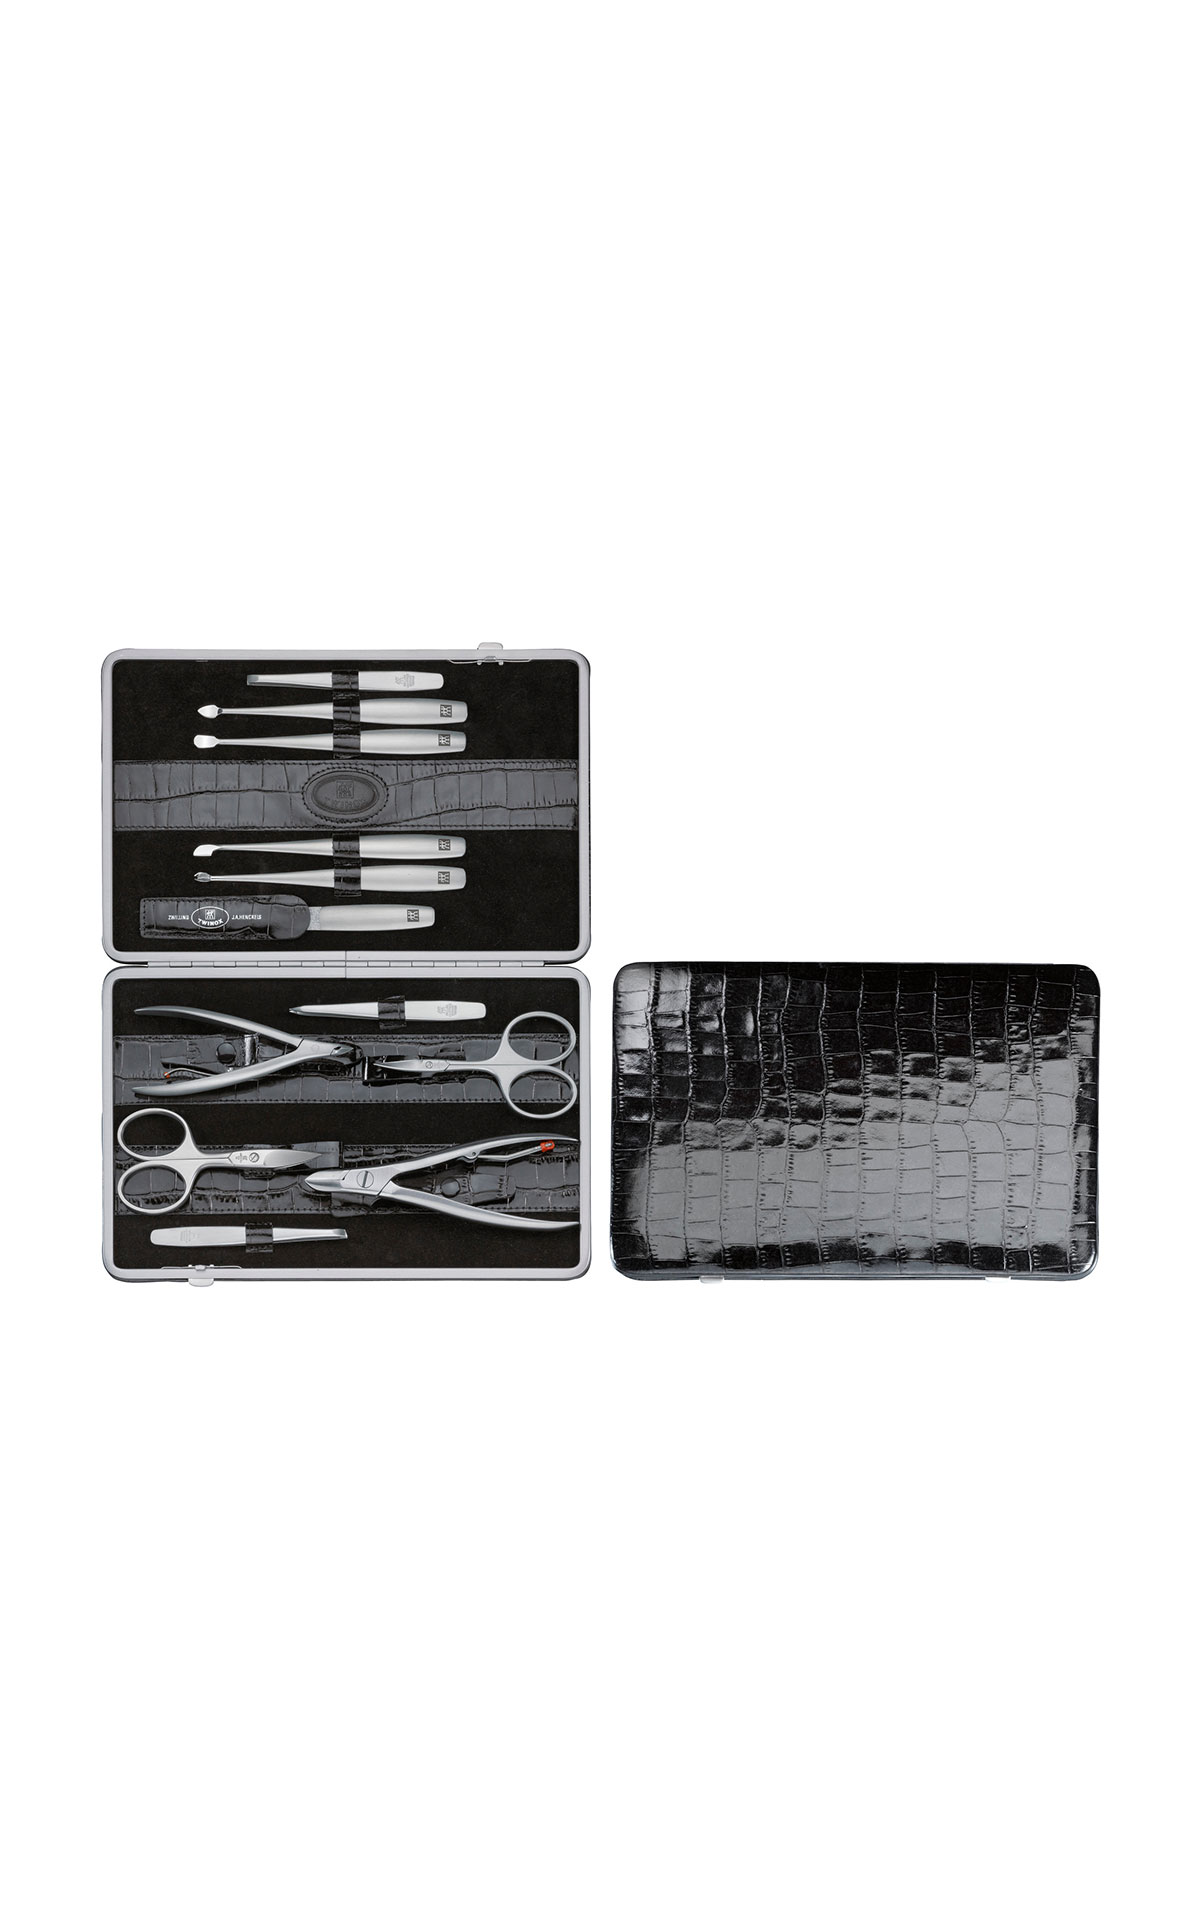 Zwilling Manicure set L from Bicester Village